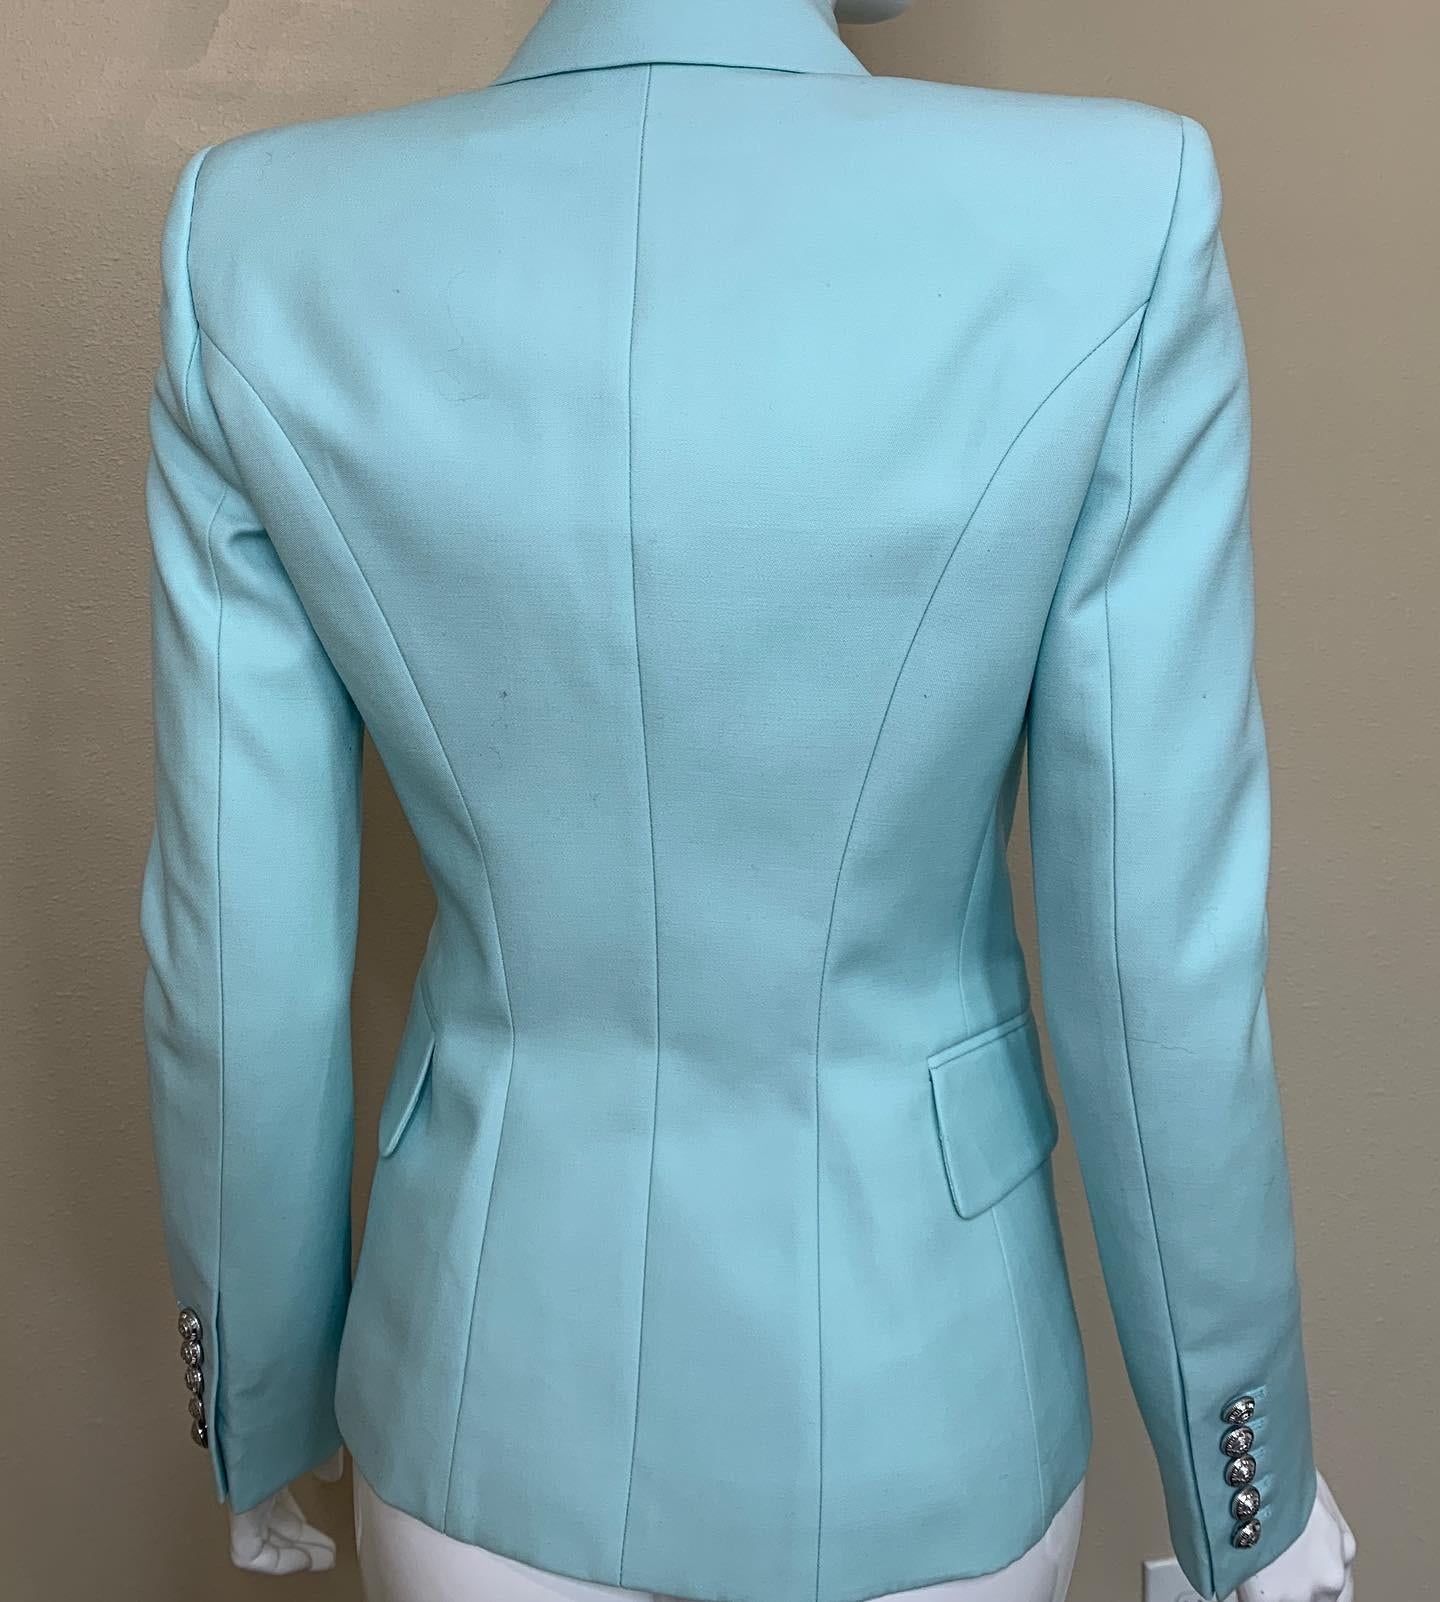 The Classic Balmain Blazer. This one is a beautiful baby blue with silver buttons. 
Tags are still on - never worn. Size 36. 

Retails for $2295

 